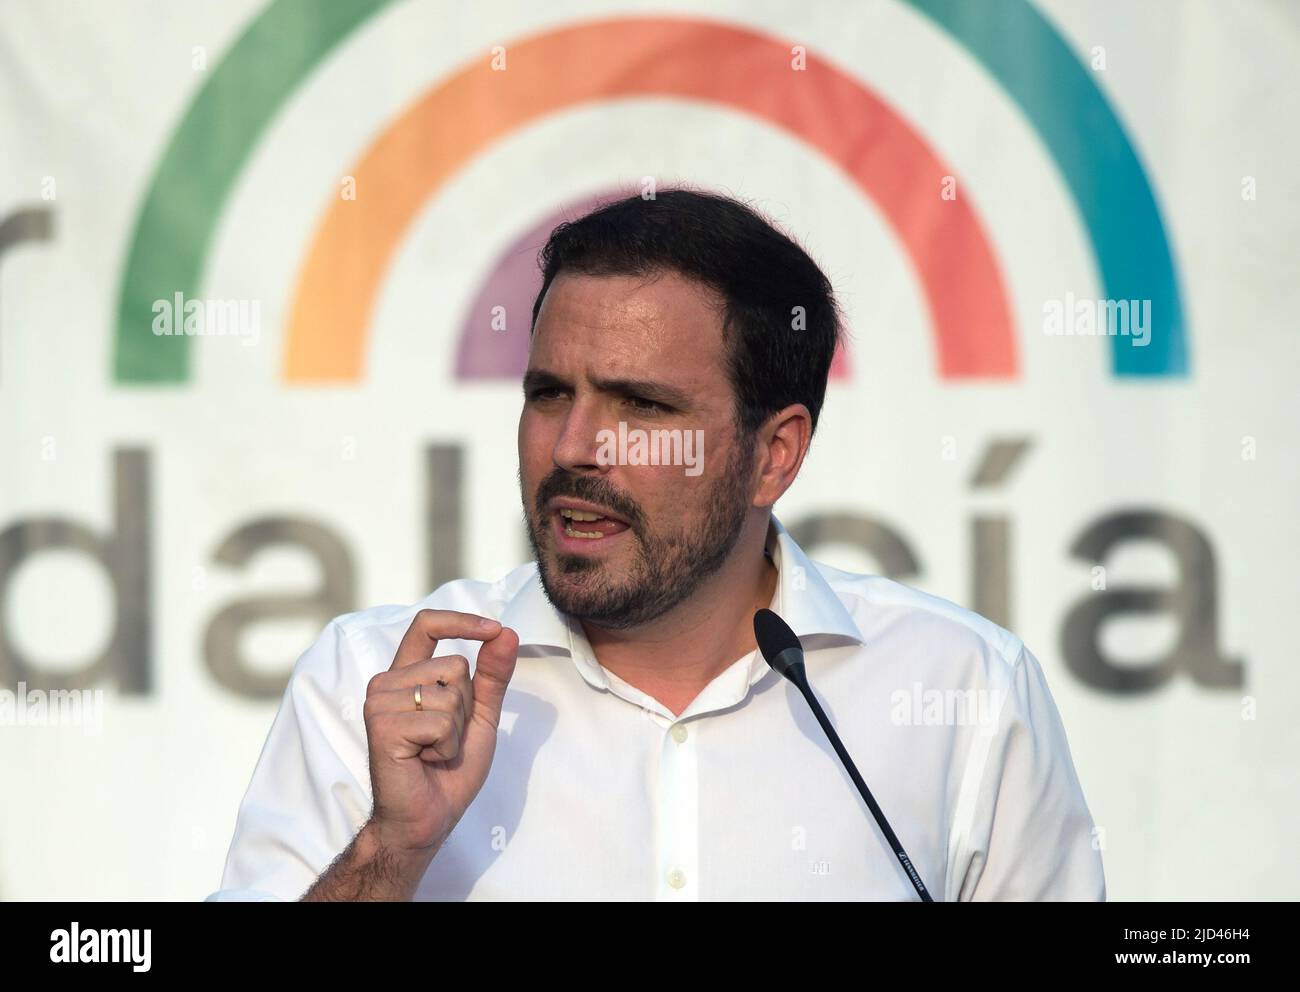 Spain's Minister of Consumer Affairs Alberto Garzon delivers a speech in a rally during the closing of Andalusian electoral campaign. Following the announcement of regional elections to be held on the 19th of June, the main political parties have started holding events and rallies in different cities in Andalusia. Several media polls place the Andalusian Popular Party in the lead, despite the rise of the Spanish far-right party VOX. Parties on the left of the political spectrum are fragmented. (Photo by Jesus Merida/SOPA Images/Sipa USA) Stock Photo